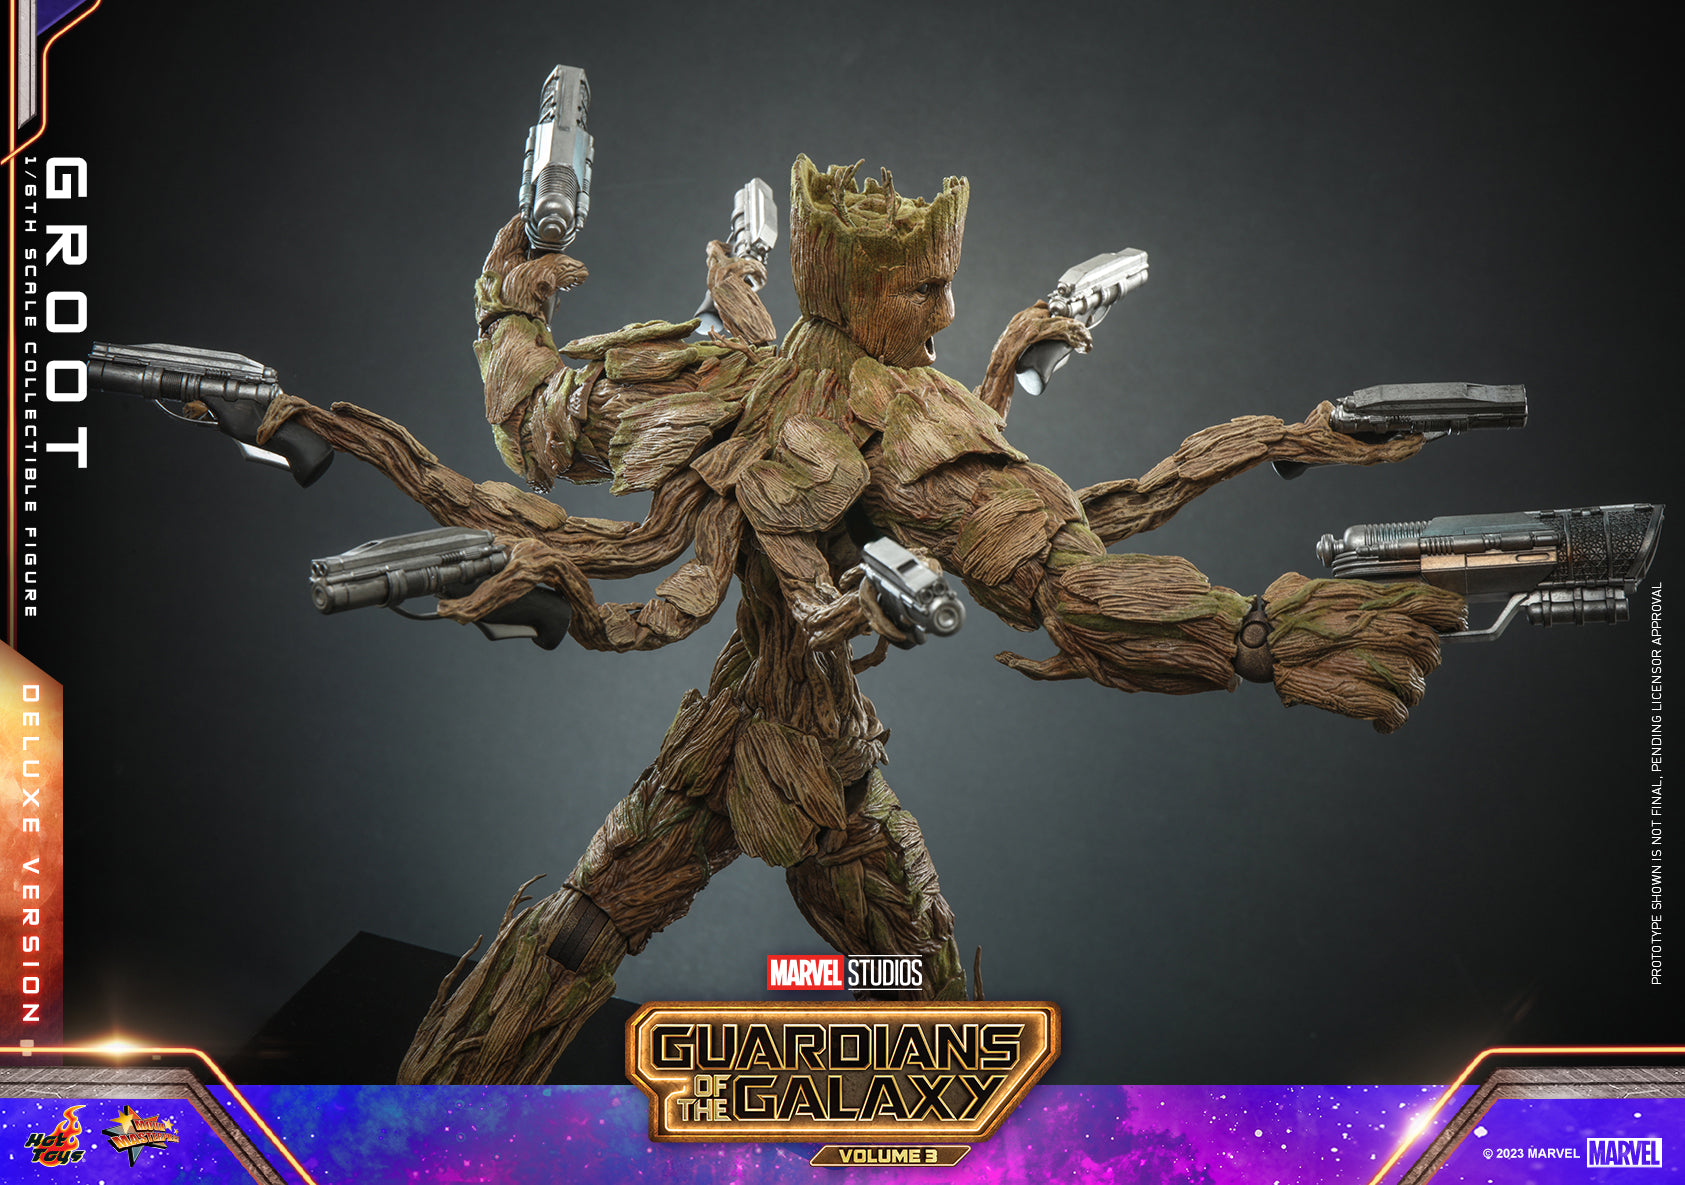 Hot Toys - MMS707 - Guardians of the Galaxy Vol. 3 - Groot (Deluxe Ver.)